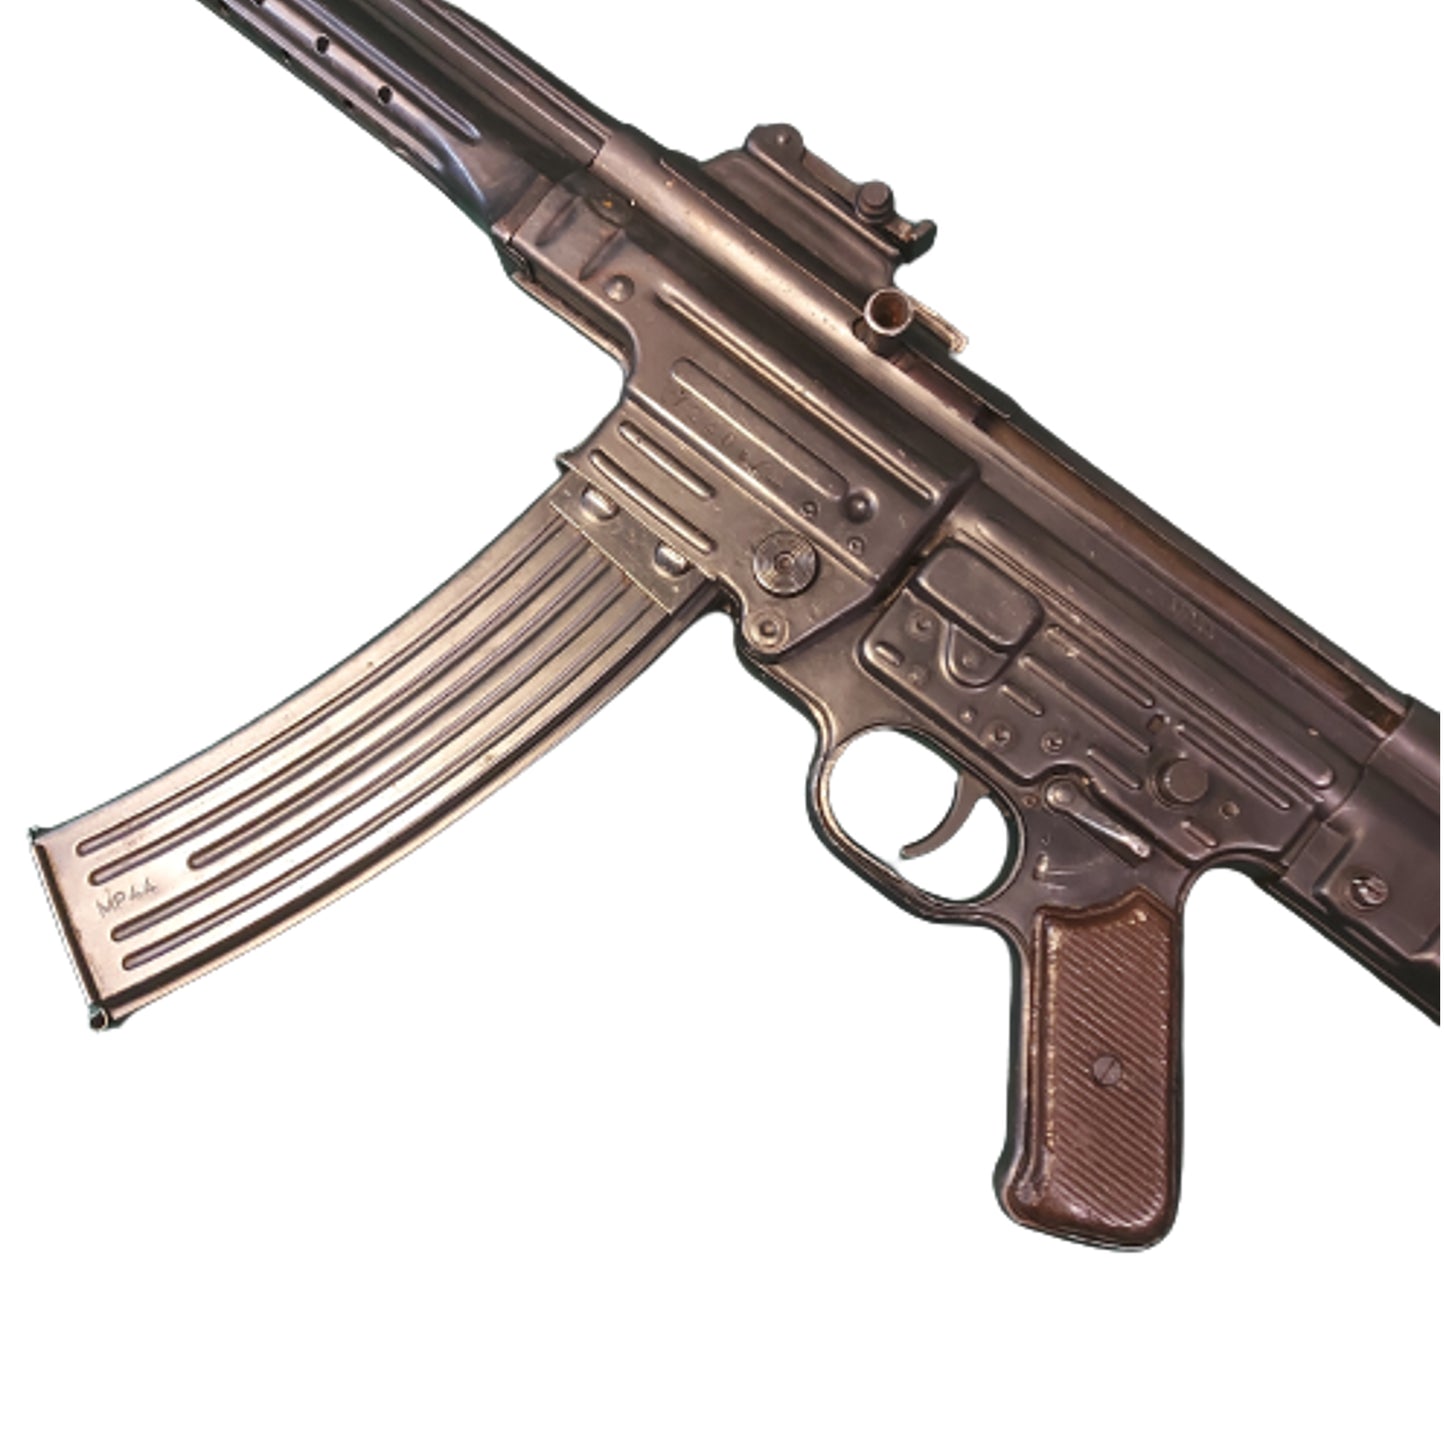 Deactivated WW2 German MP44/StG44 SMG